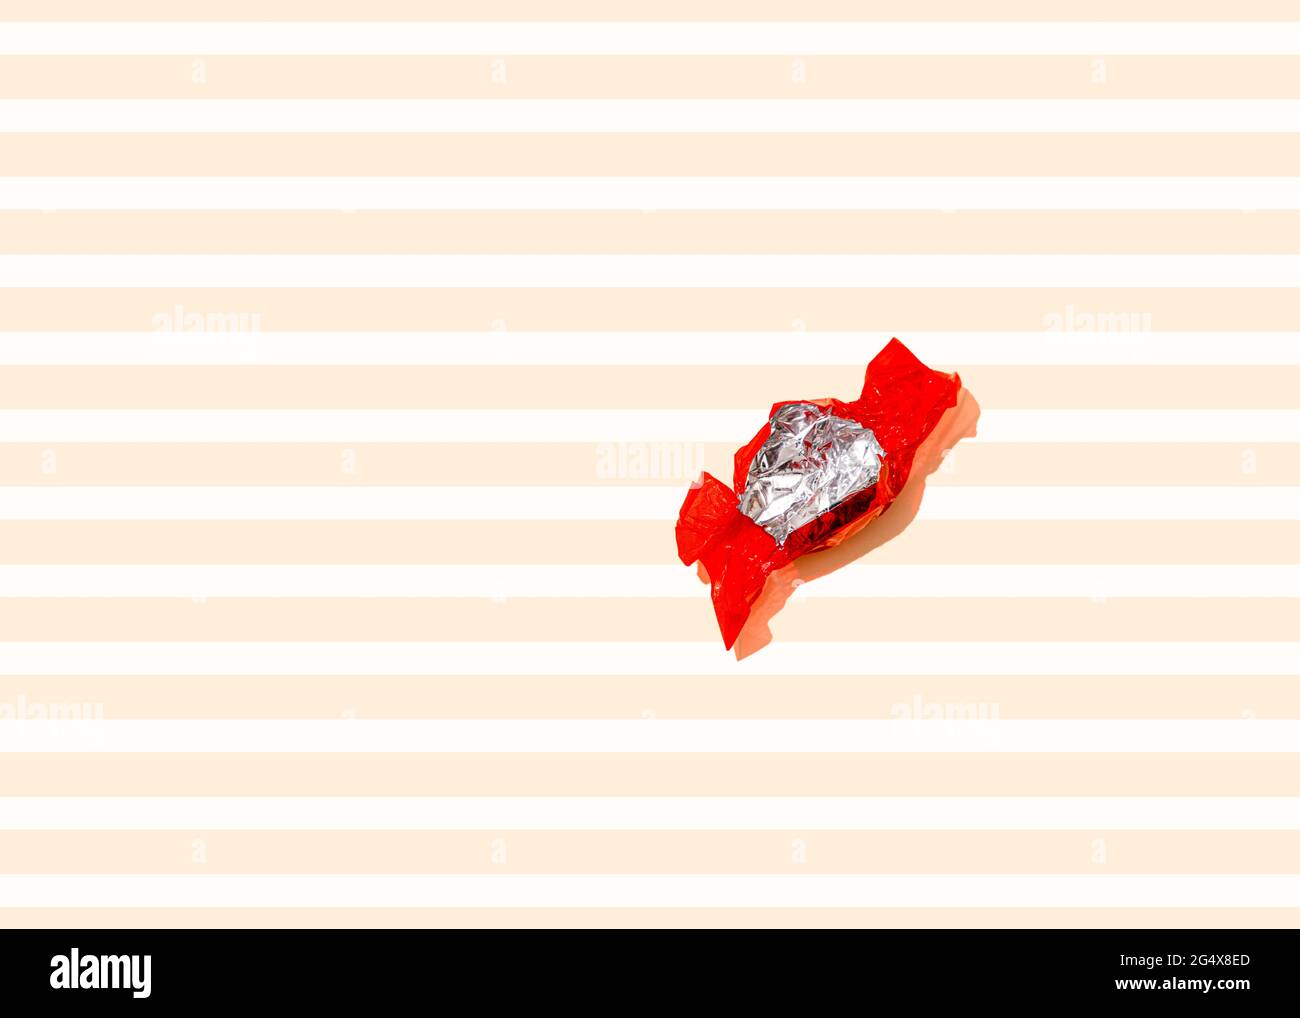 Studio shot of empty candy wrapper Stock Photo